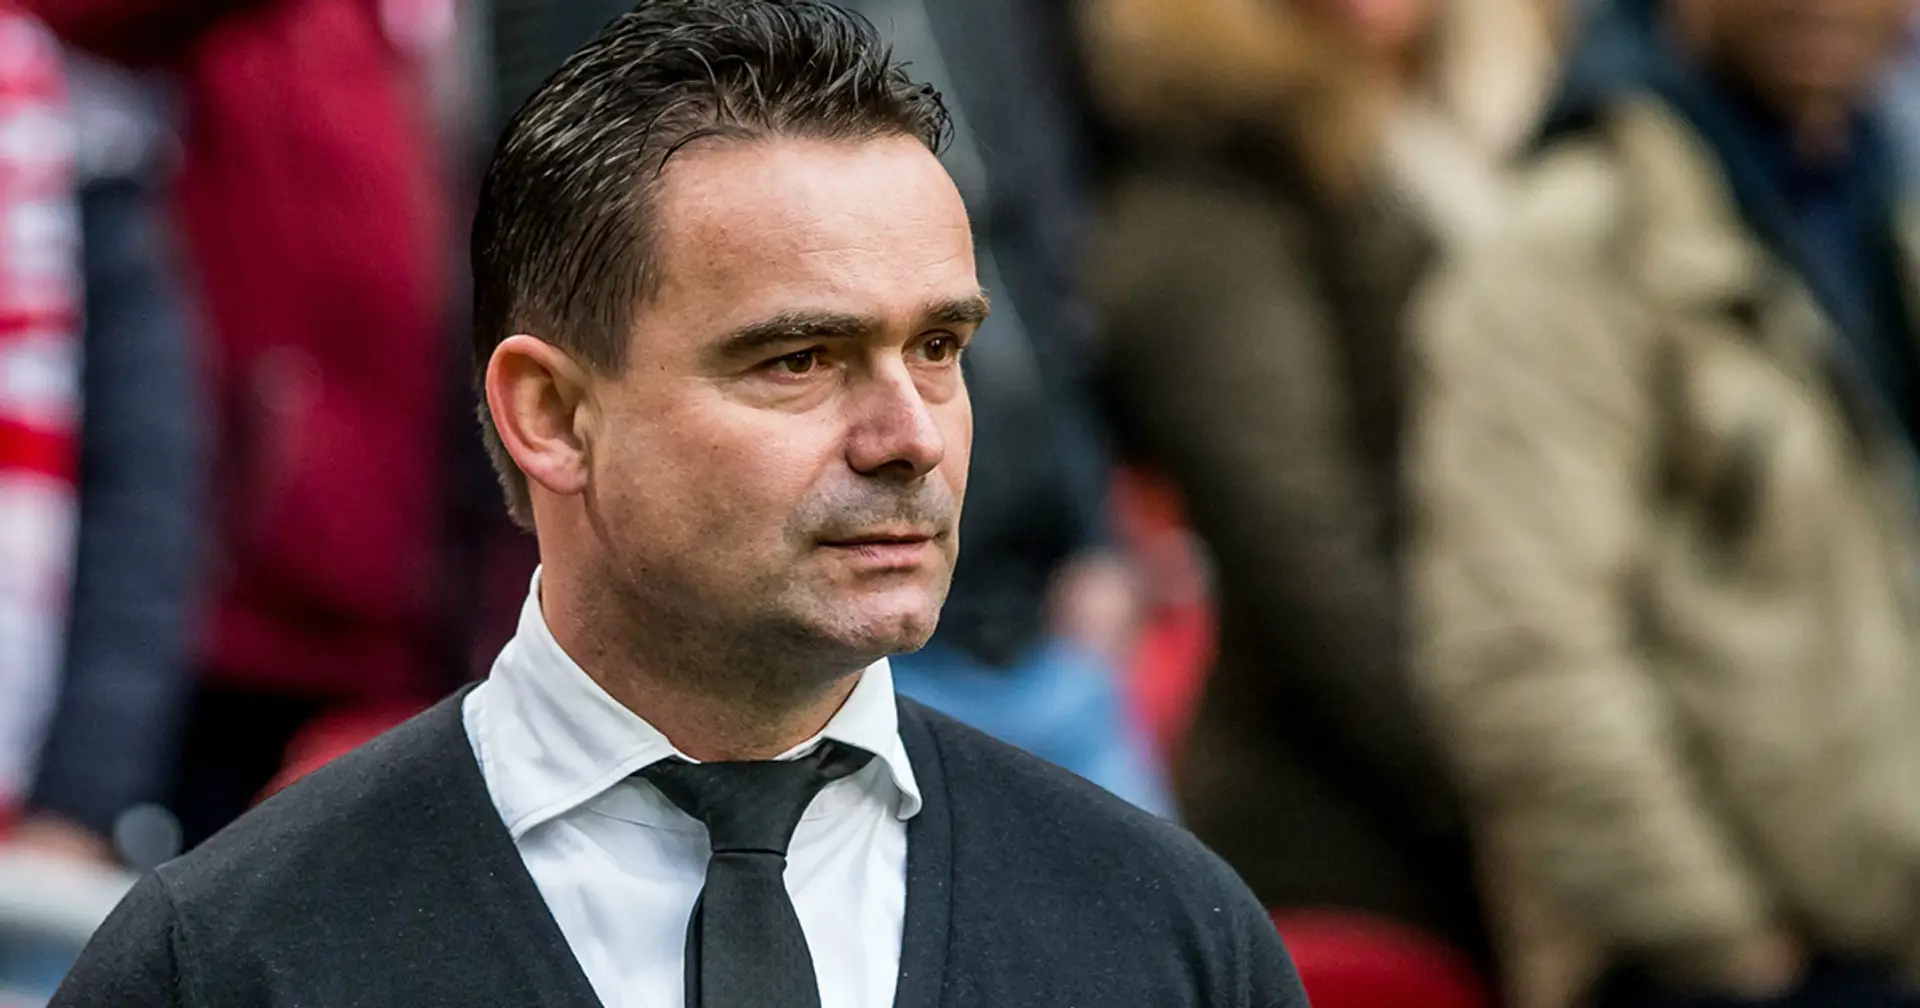 Ajax sporting director Overmars reportedly quits job, may join Barcelona in summer